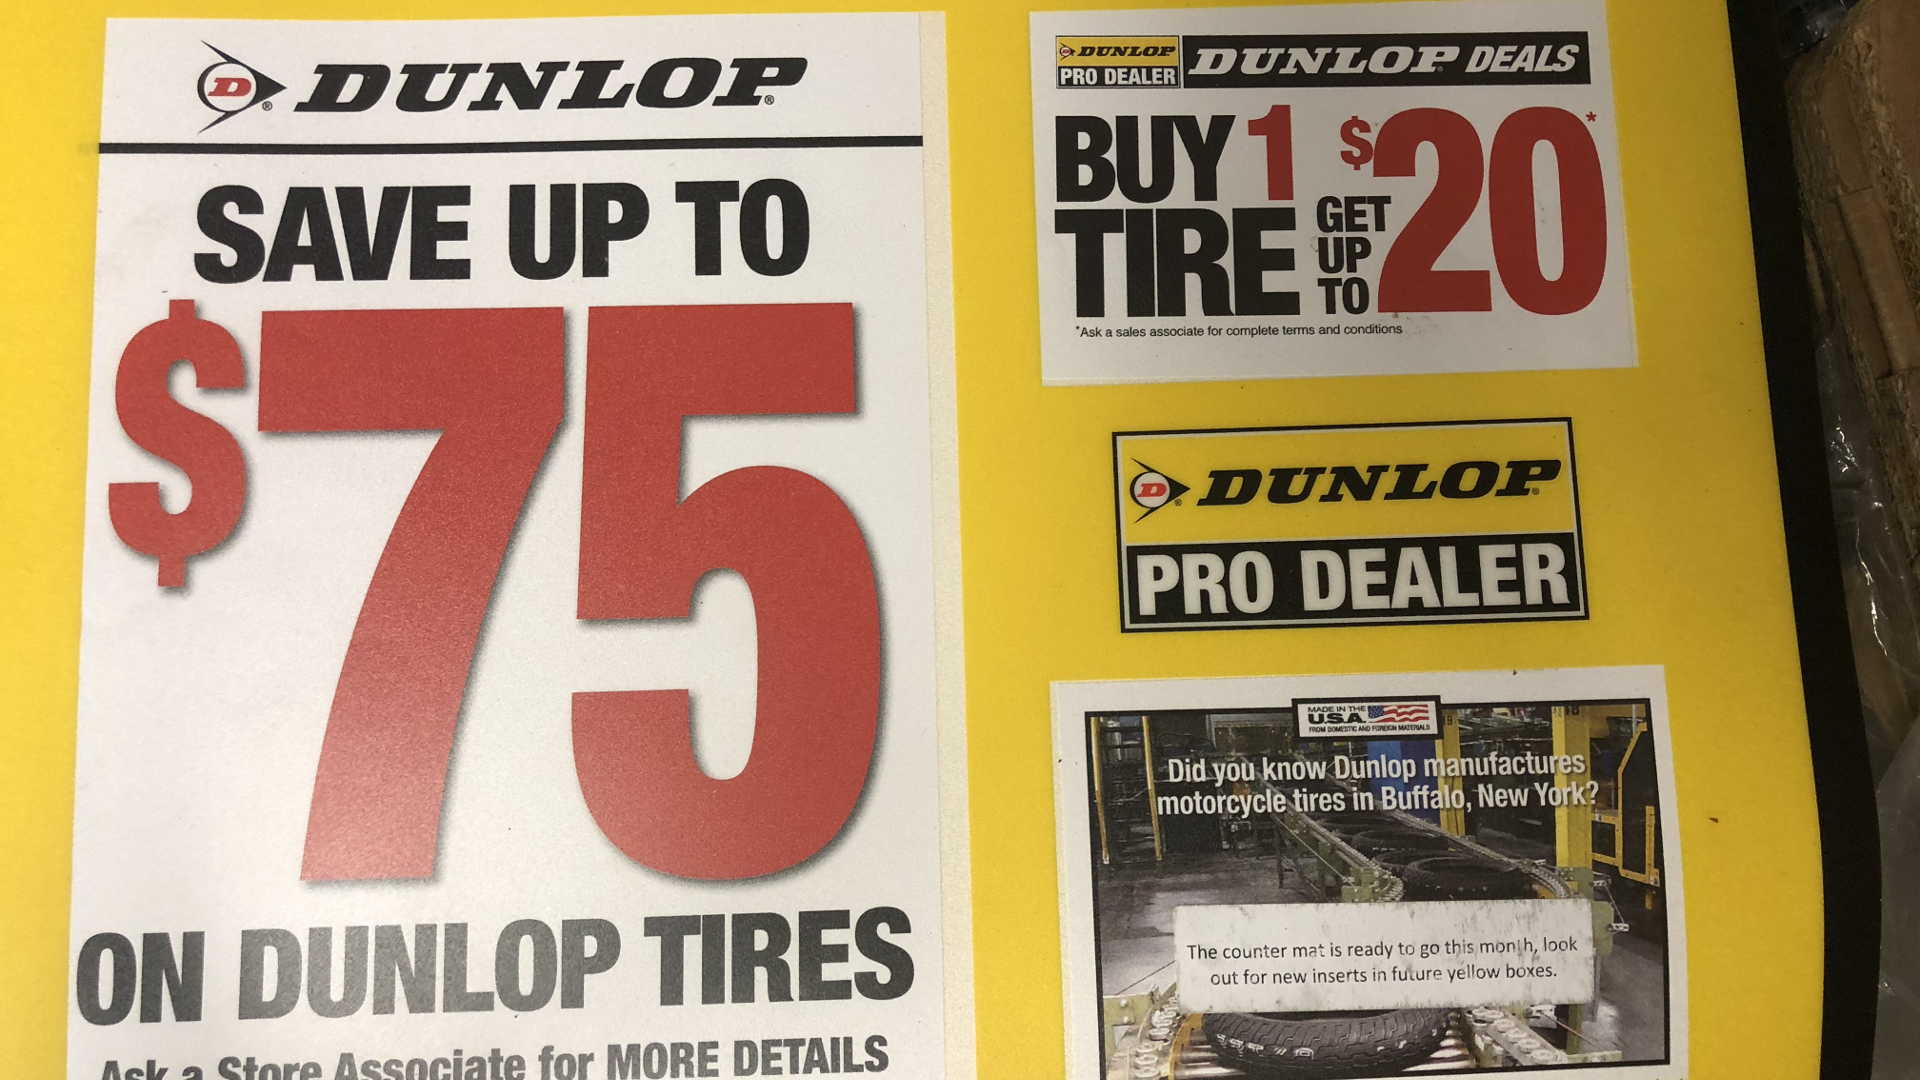 Dunlop Motorcycle Tires on sale in March and April